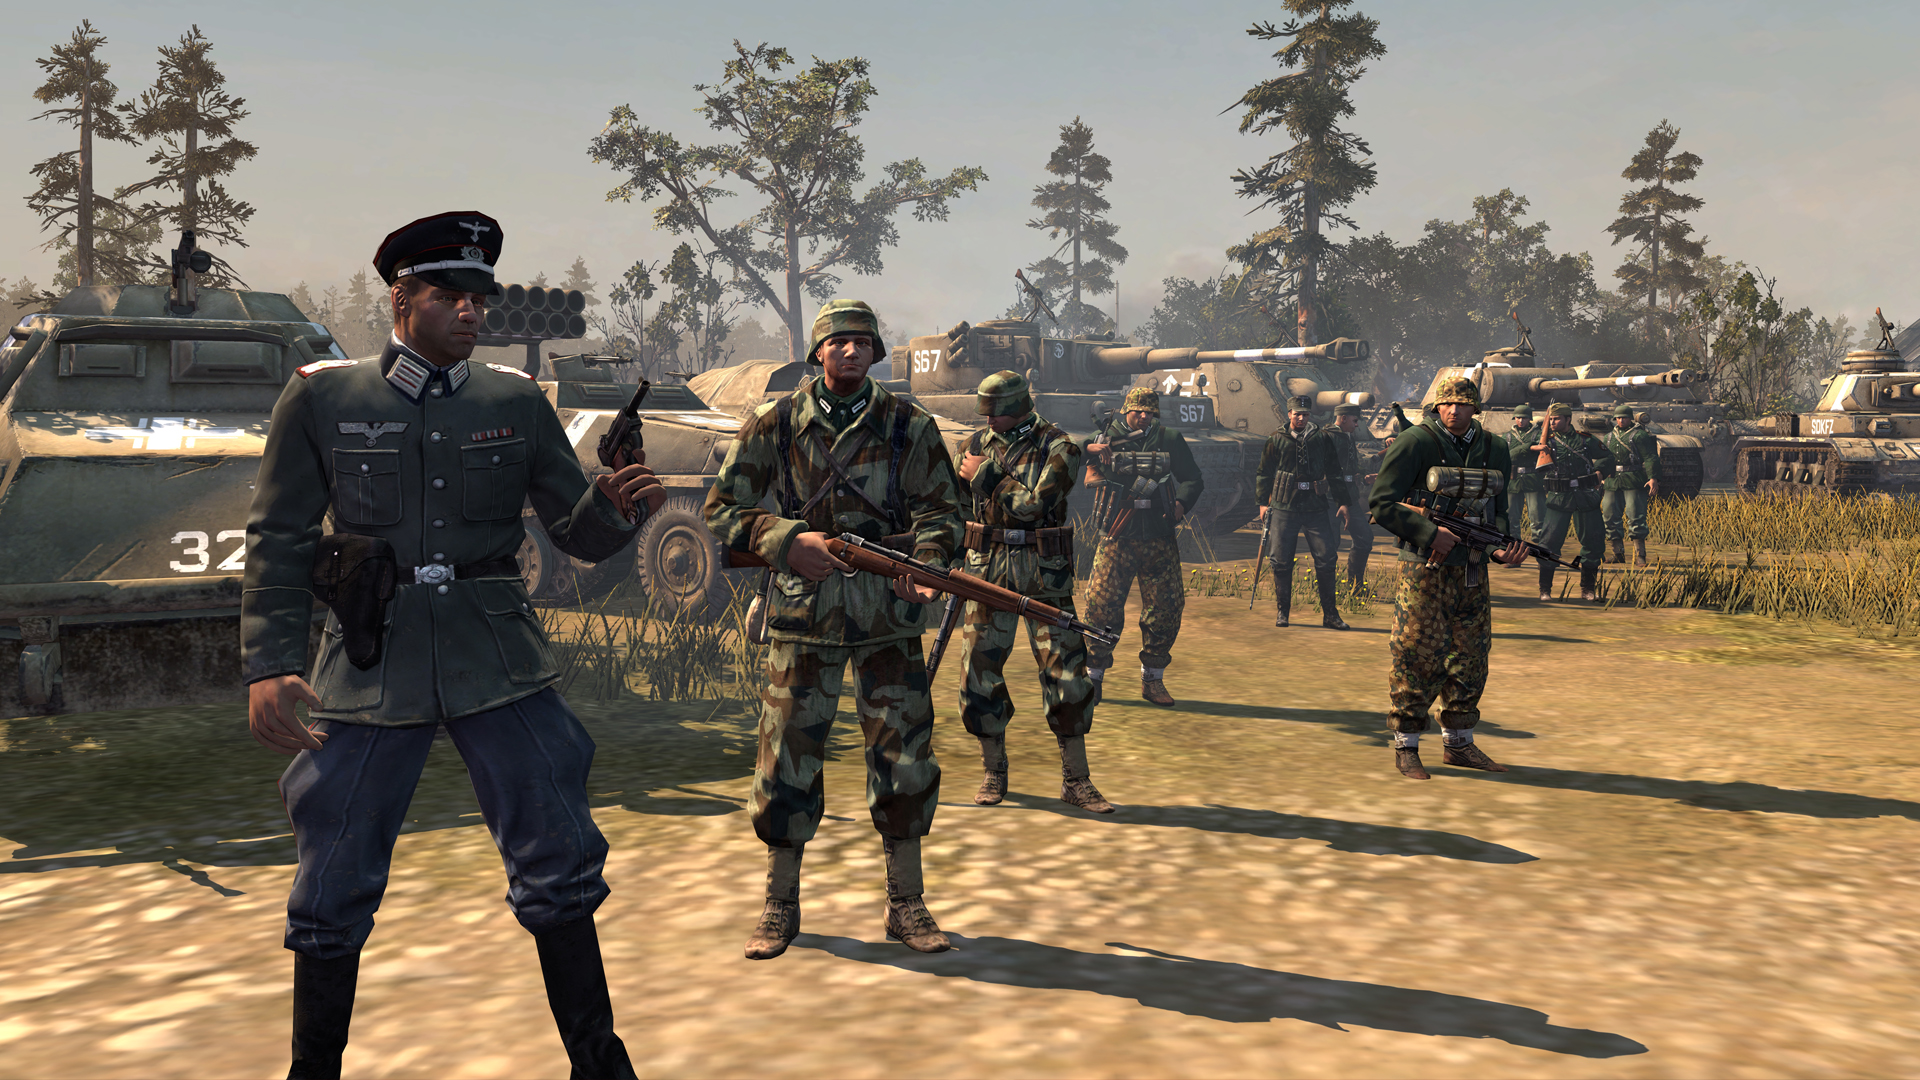 720p company of heroes 2 backgrounds